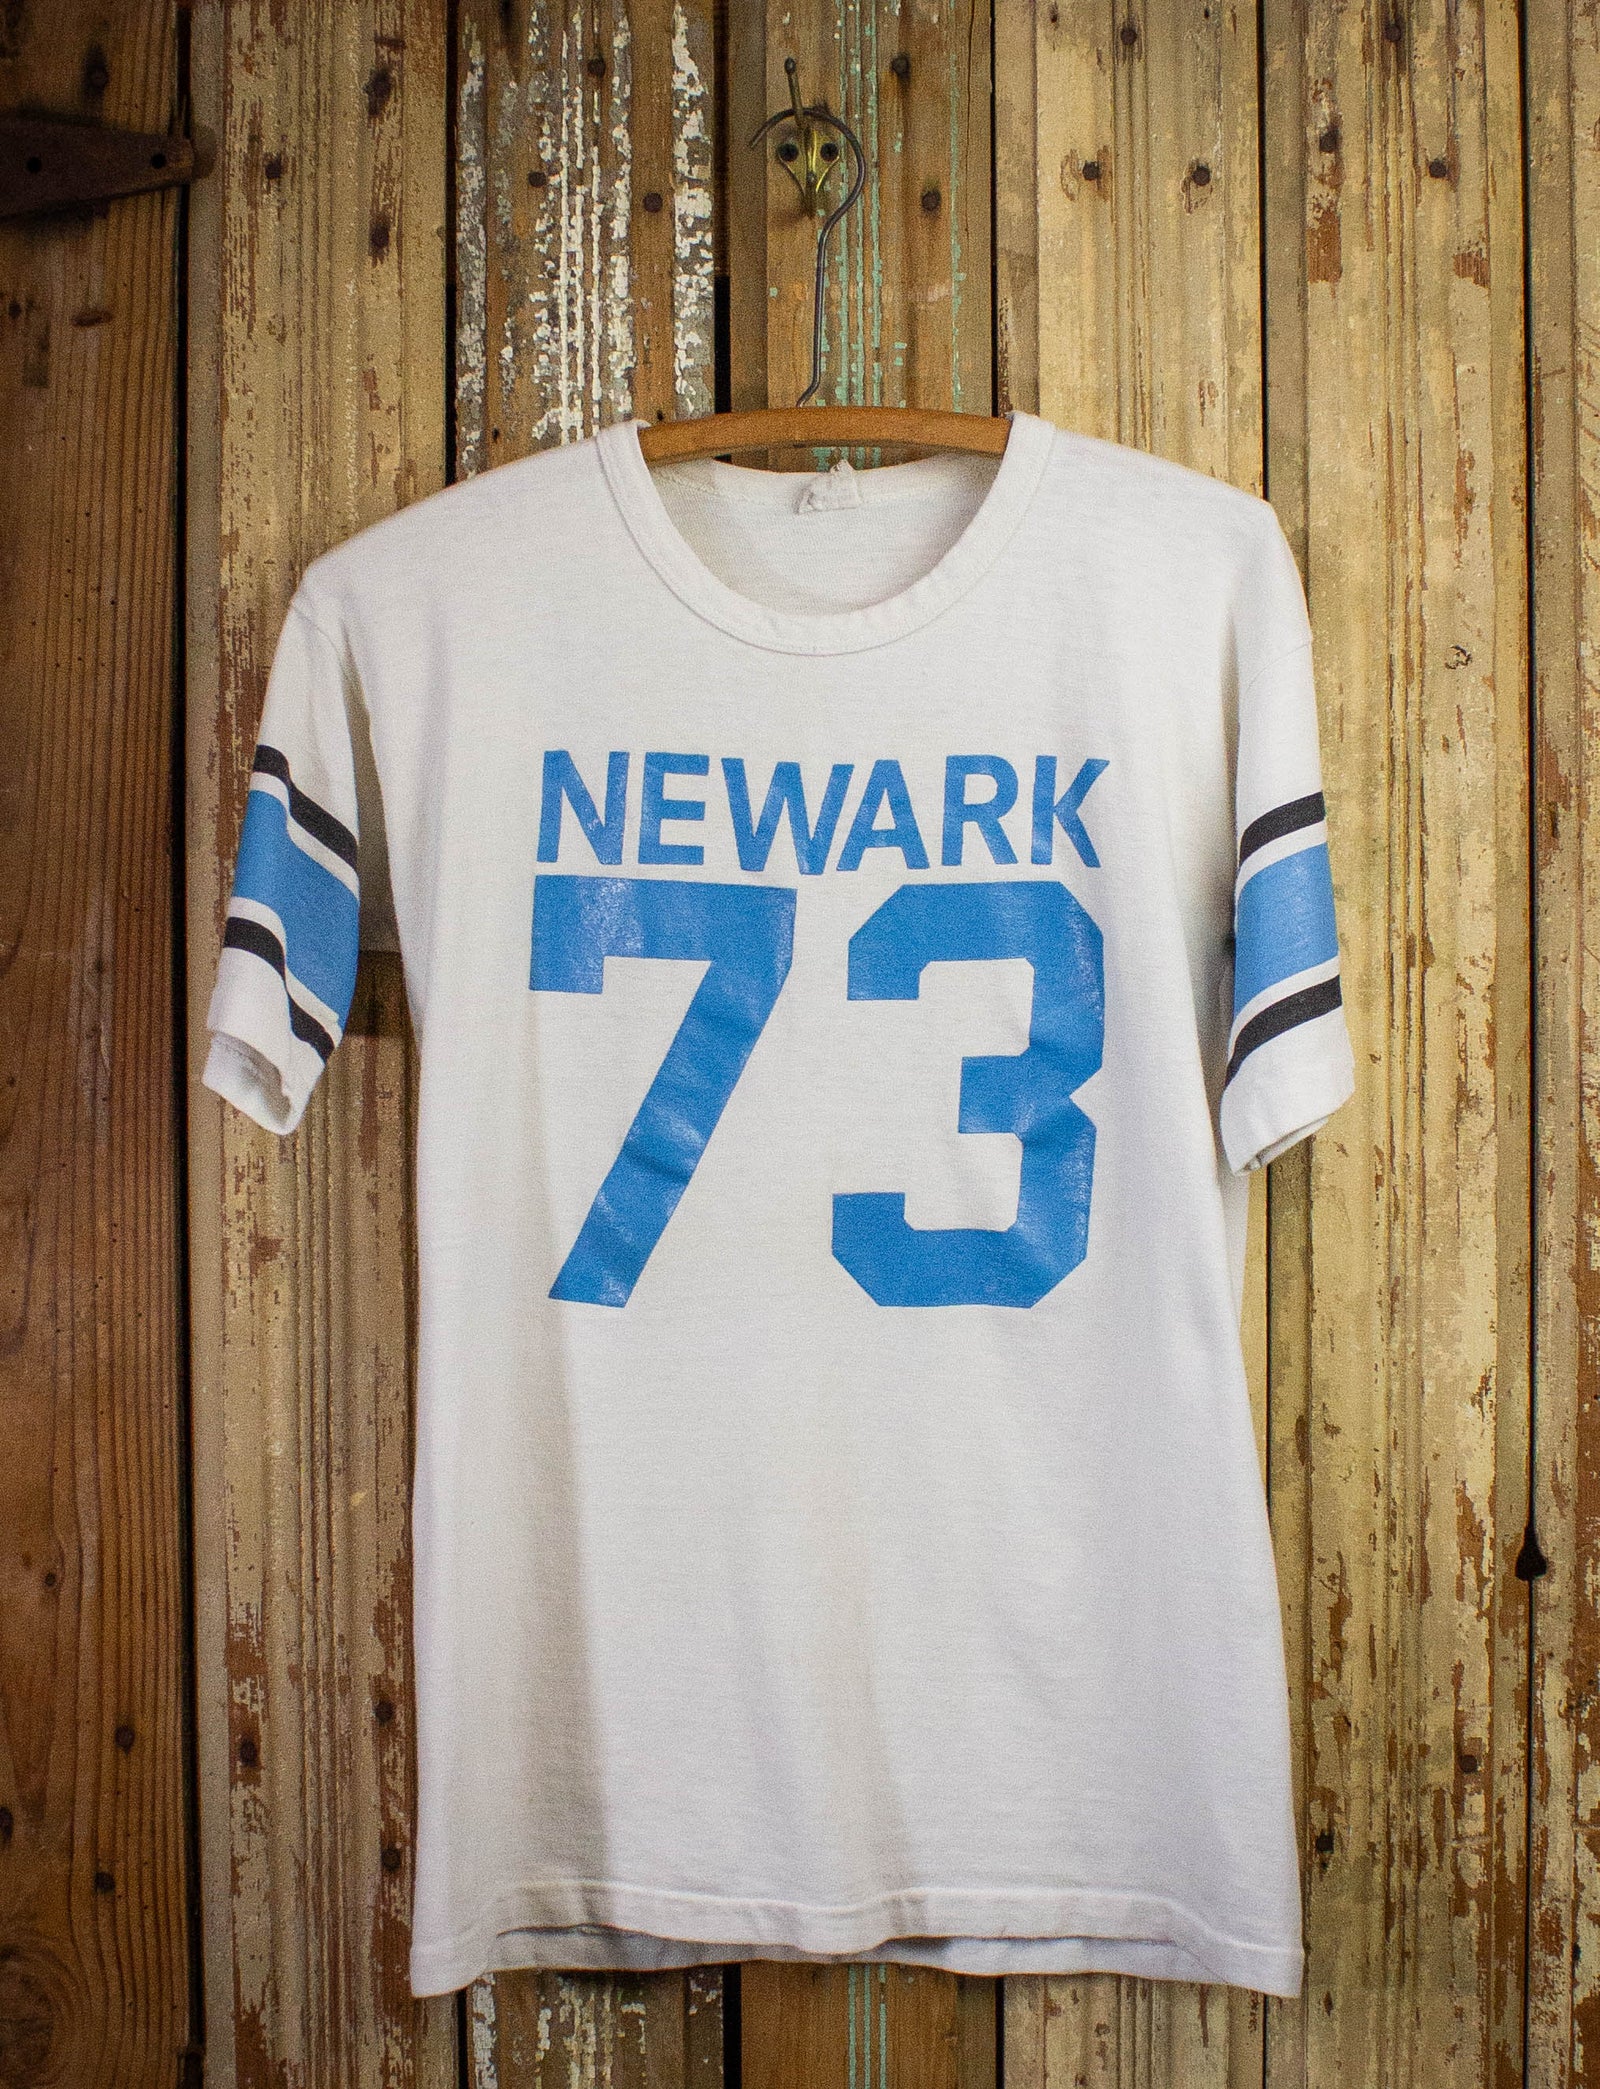 Vintage Newark Jersey Graphic T Shirt 60s White Small